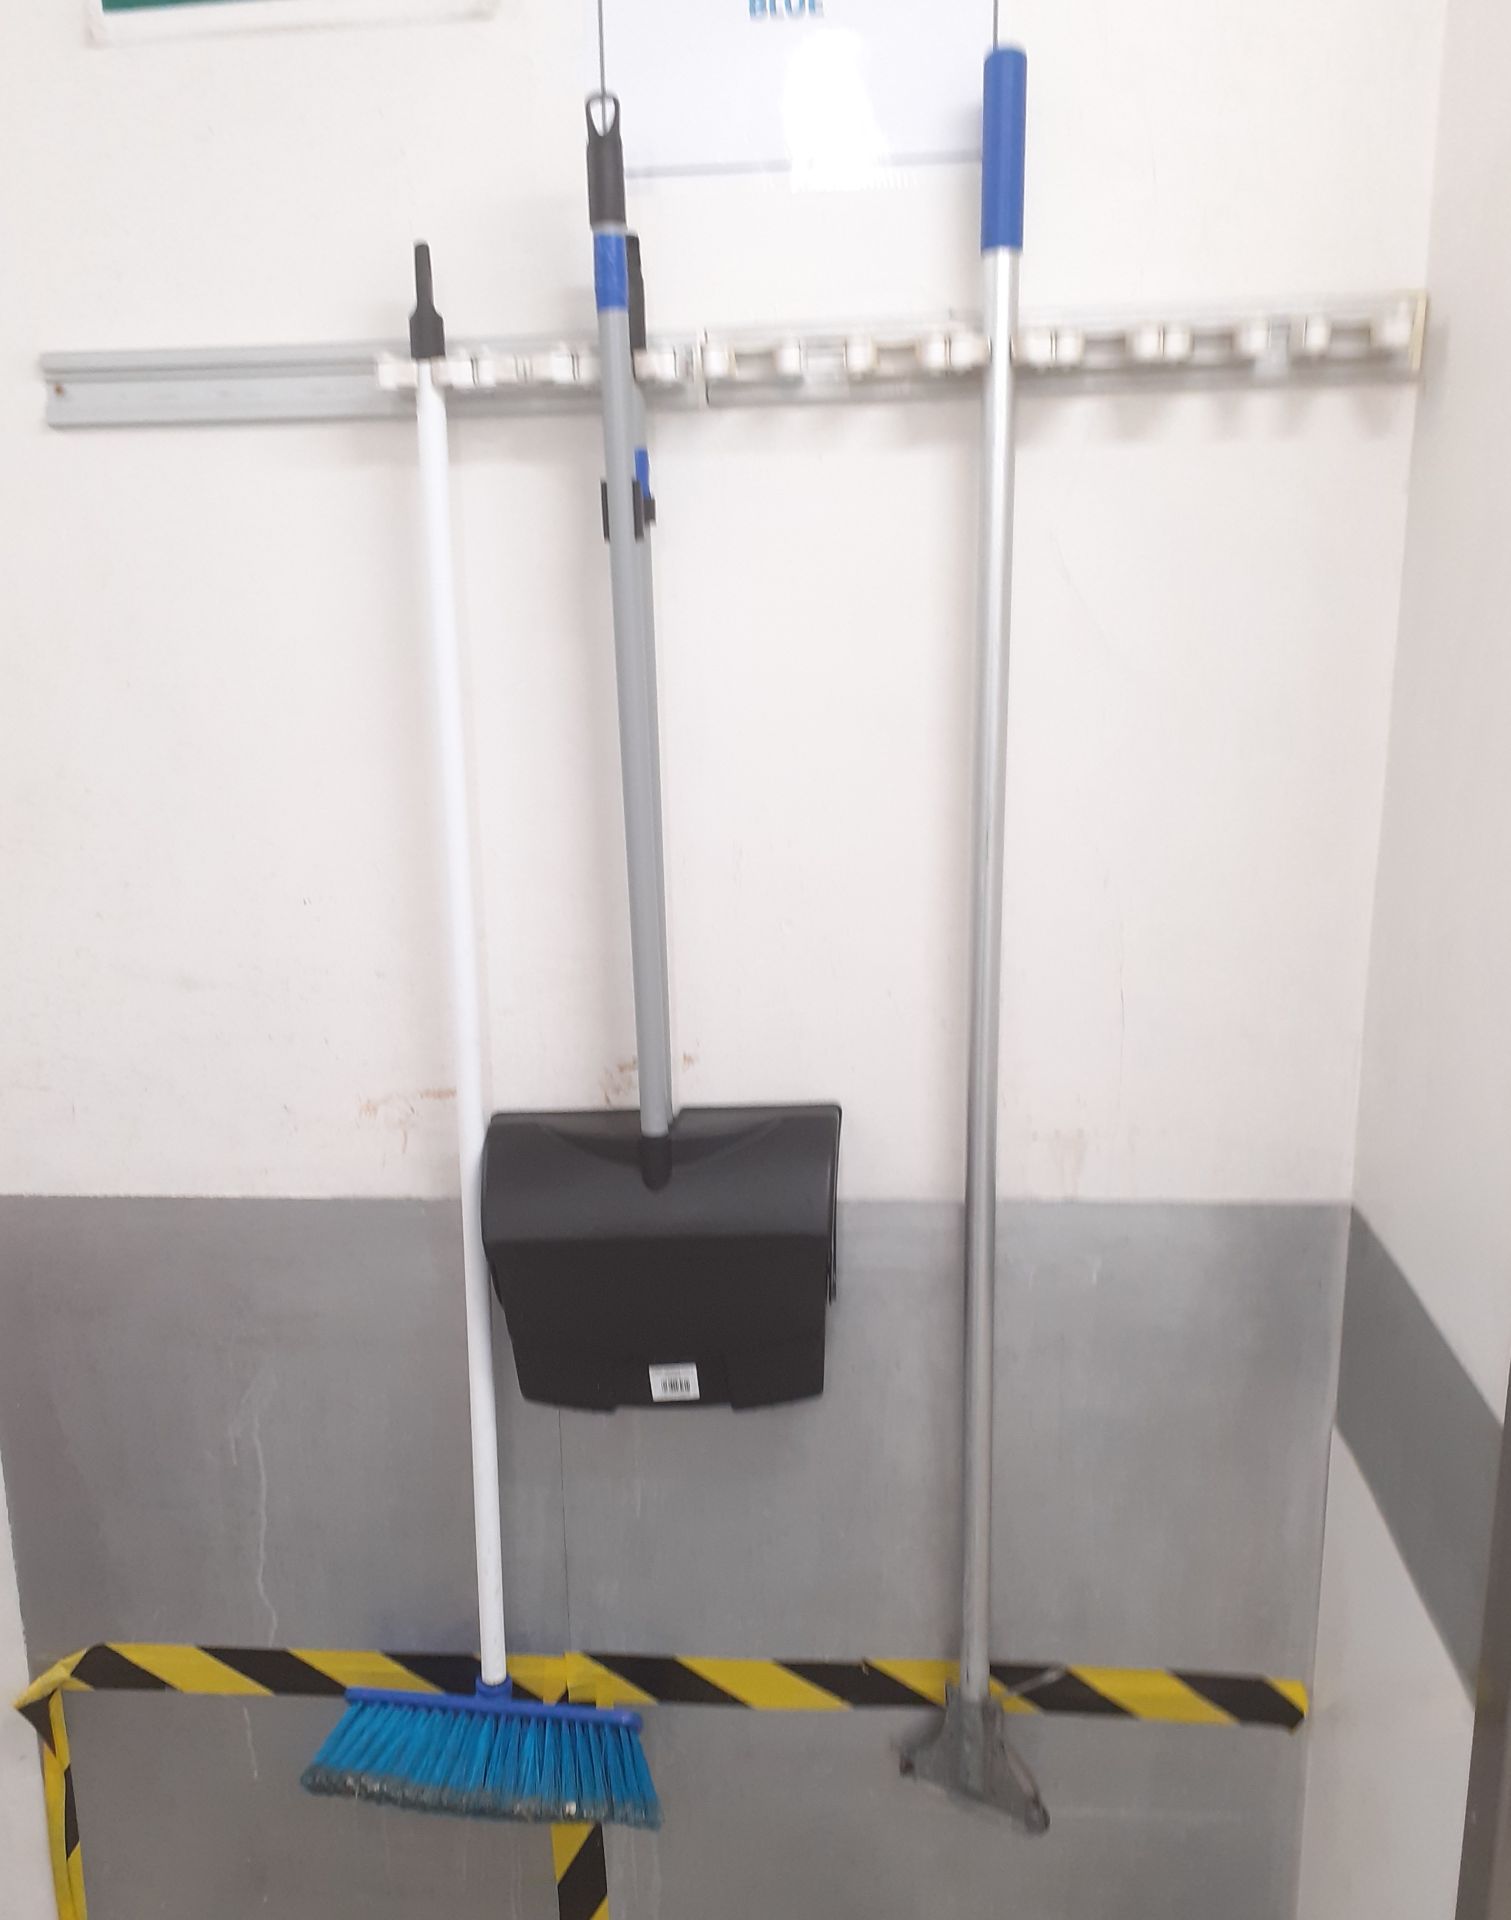 1 x Wall Mounted Handle Stand For Mops, Brushes, Dustpans etc - Includes Mop Handle, Sweeping